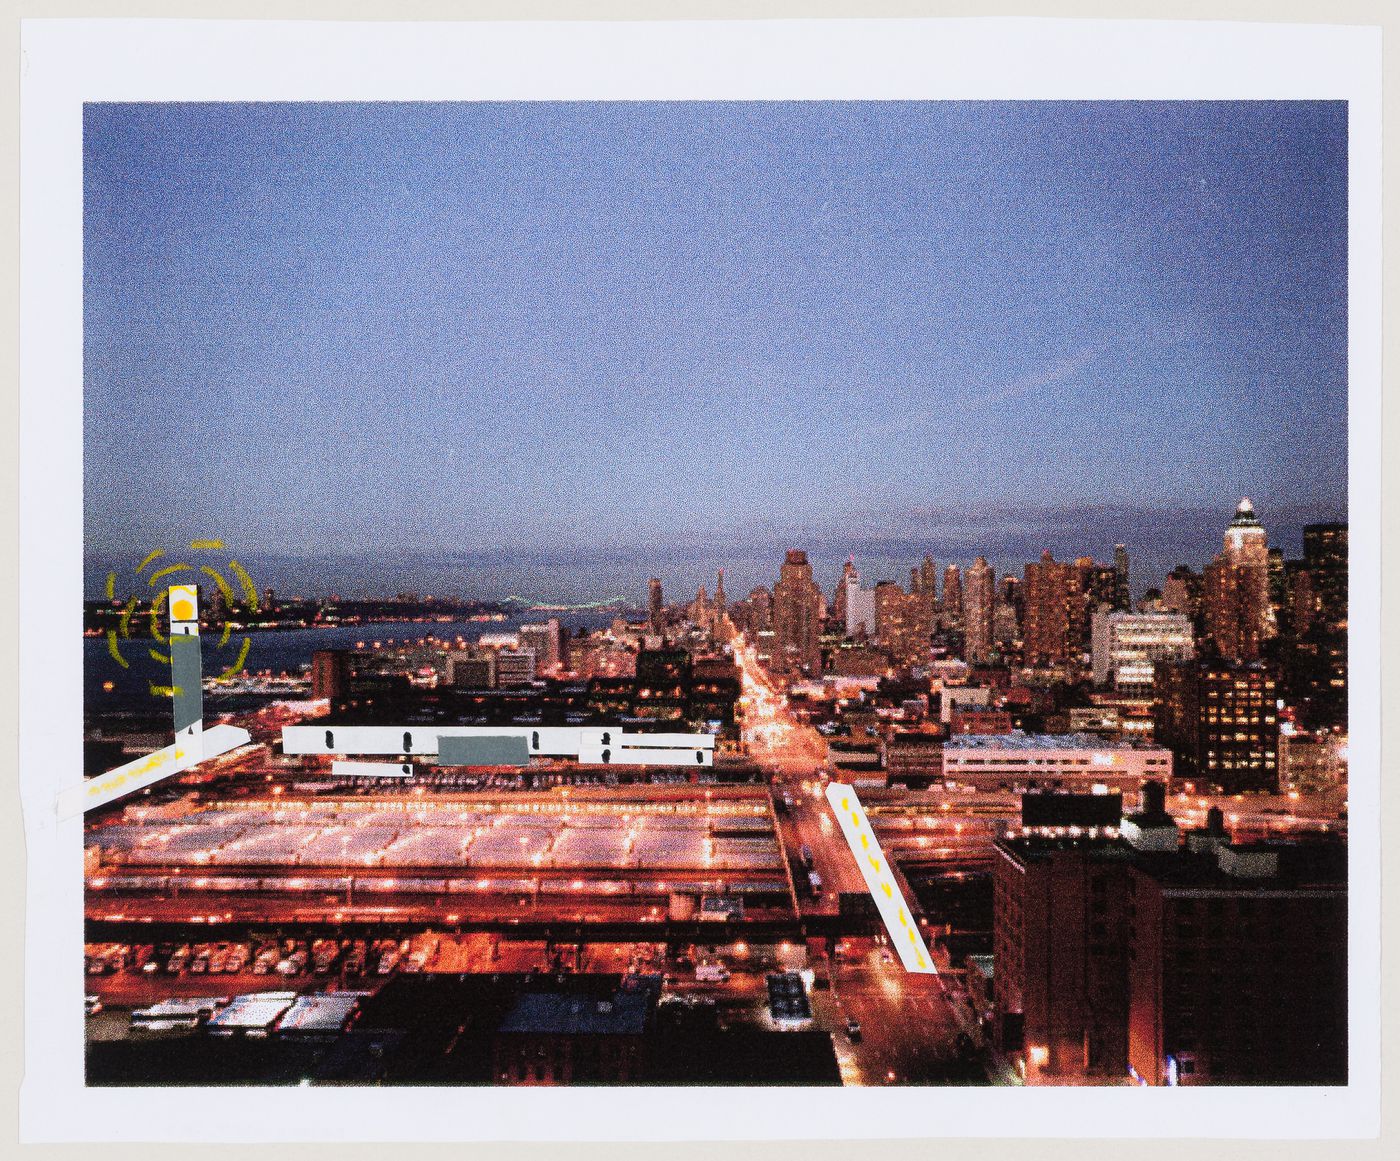 IFPRI (IFCCA Prize Competition, 1998-1999, Entry by Cedric Price): view of site with proposed structures (laser transmission tower, Hudson Sleeve, Javits Convention Center South Extension and City Sleeve)